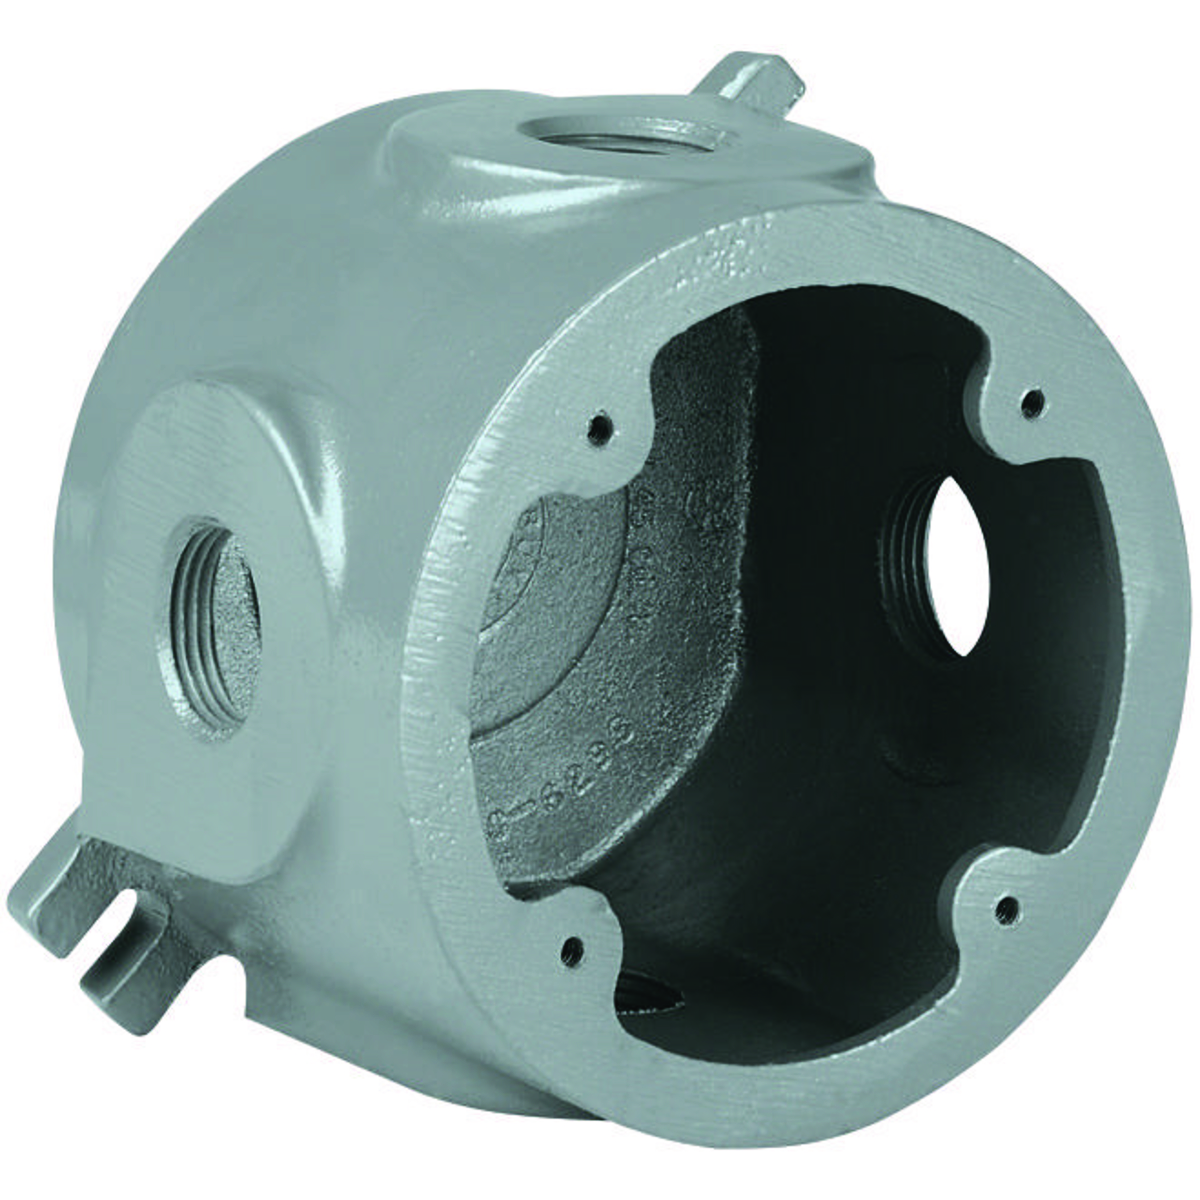 ROUND OUTLET 3-5/8" 1" HUB